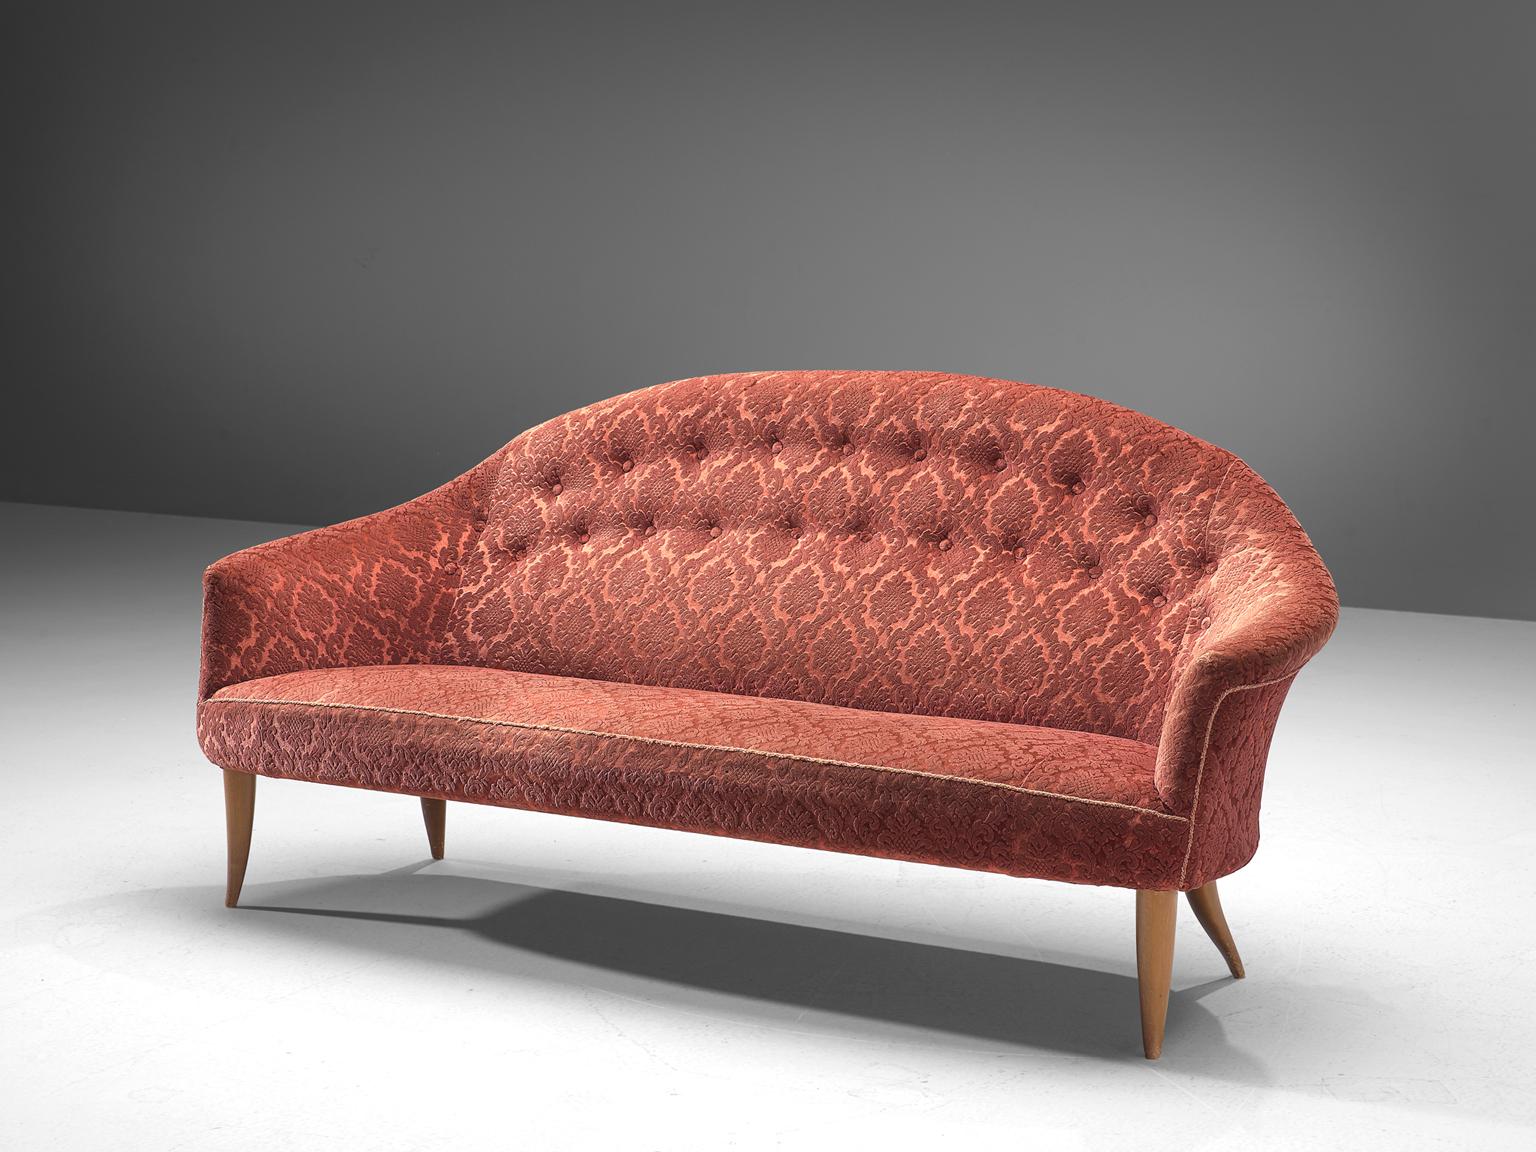 Kerstin Horlin-Holmquist for Nordiska Kompaniet, 'Stora Paradiset' sofa, fabric and wood, Sweden, 1958.

Elegant two-seat sofa by Swedish designer Kerstin Horlin-Holmquist. The beautifully tapered and curved legs compliments the design of the seat